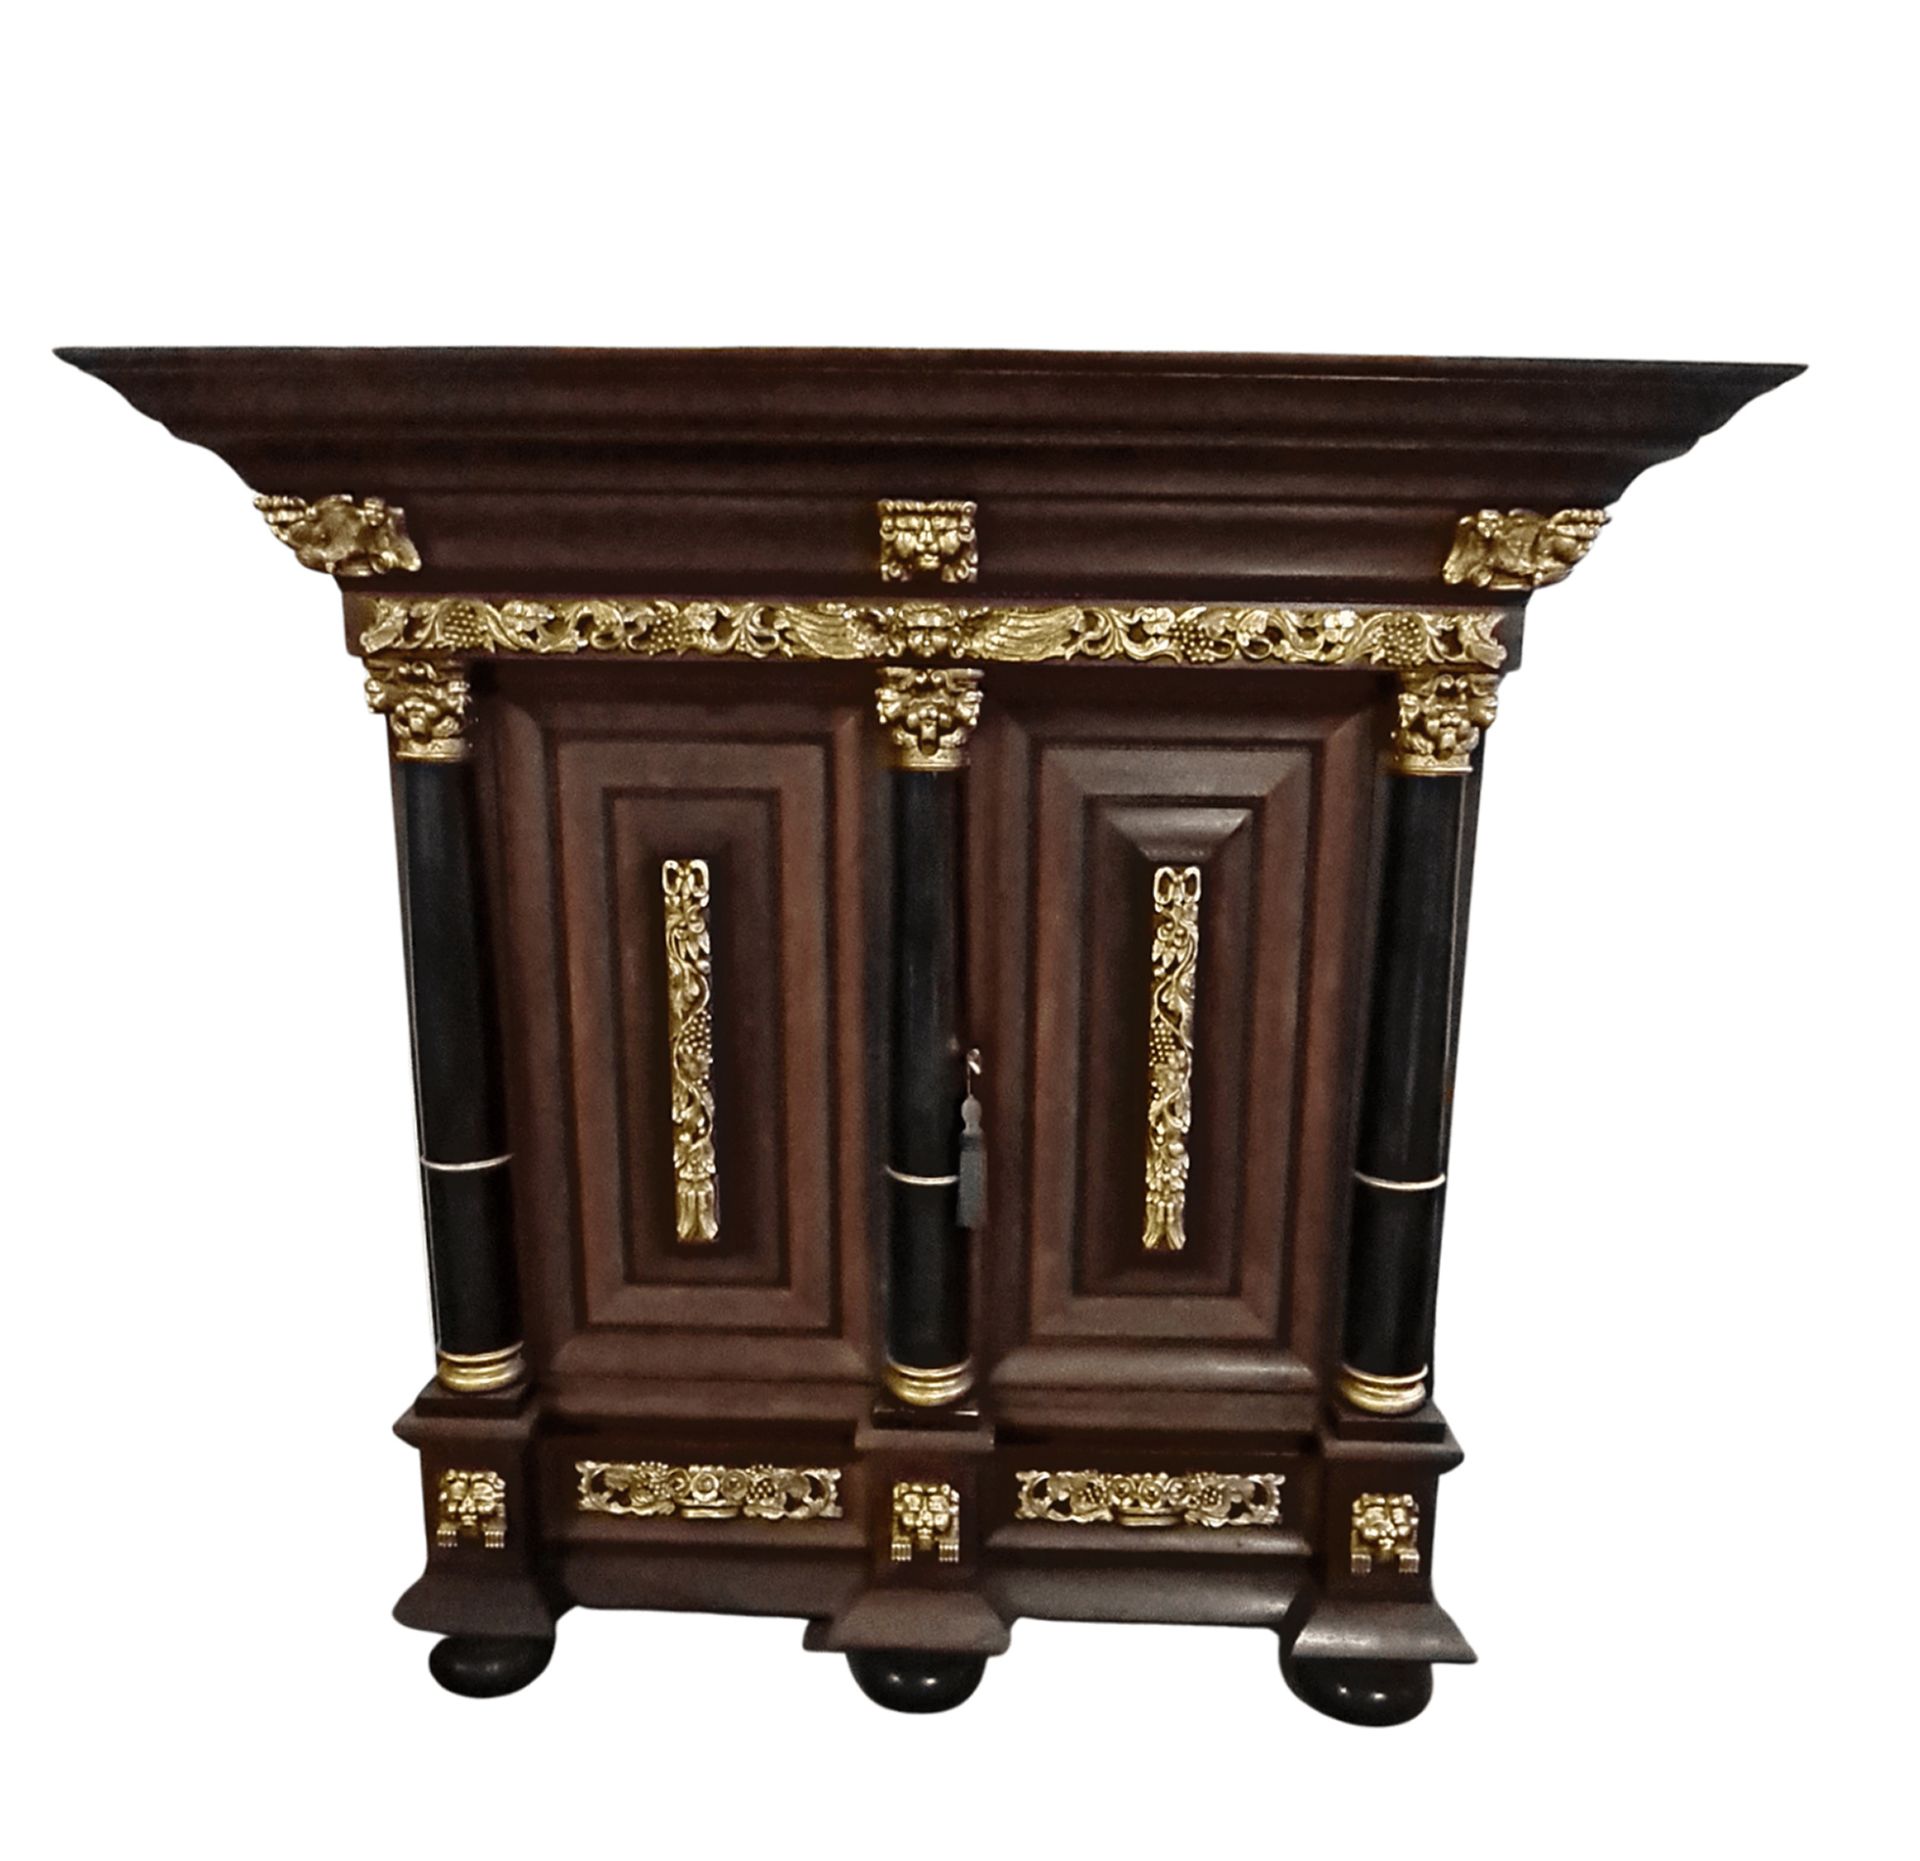 Dutch Chest in Ebonized Wood and Gilt Bronze Sconces, 19th Century - Image 2 of 2